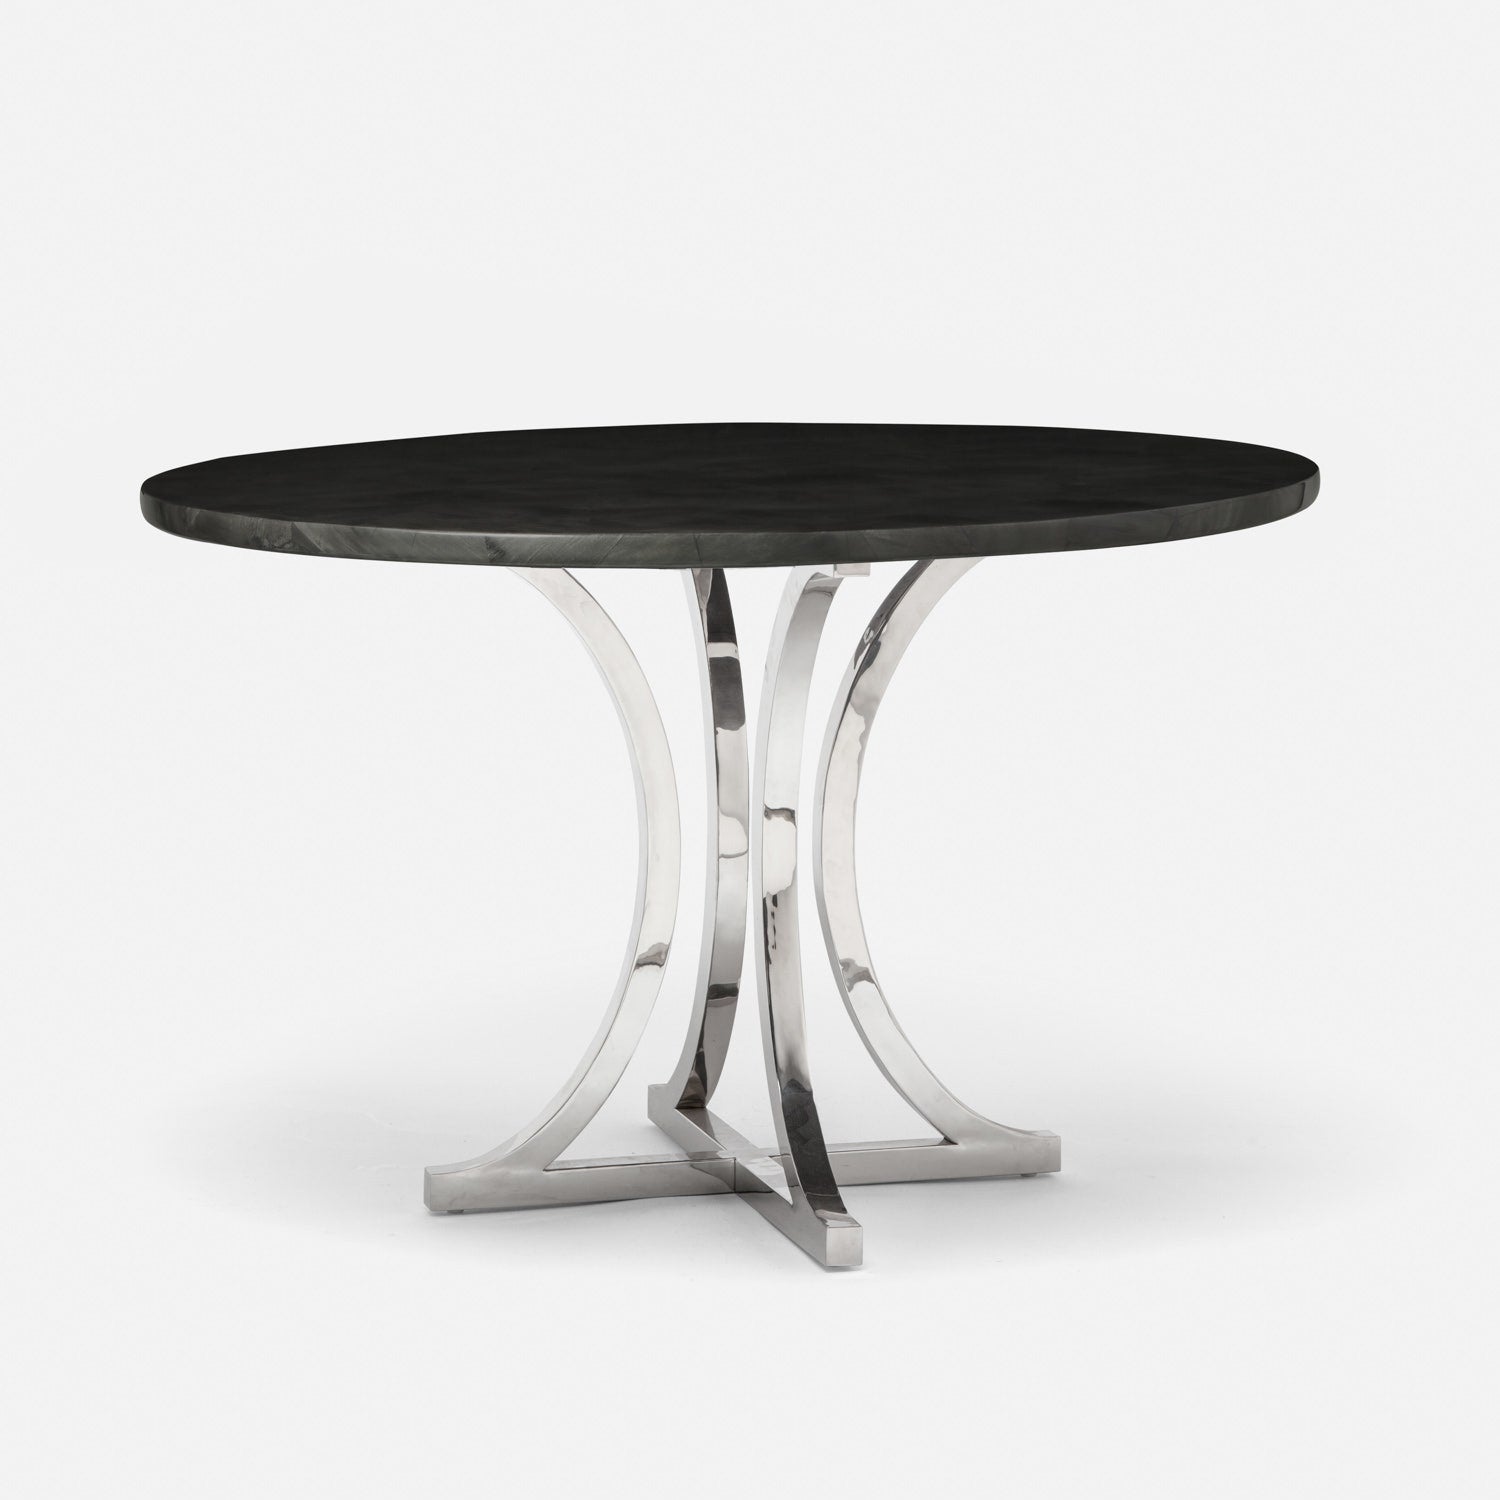 Made Goods Leighton 60" x 30" Polished Silver Steel Dinning Table With Round Dark Faux Horn Table Top